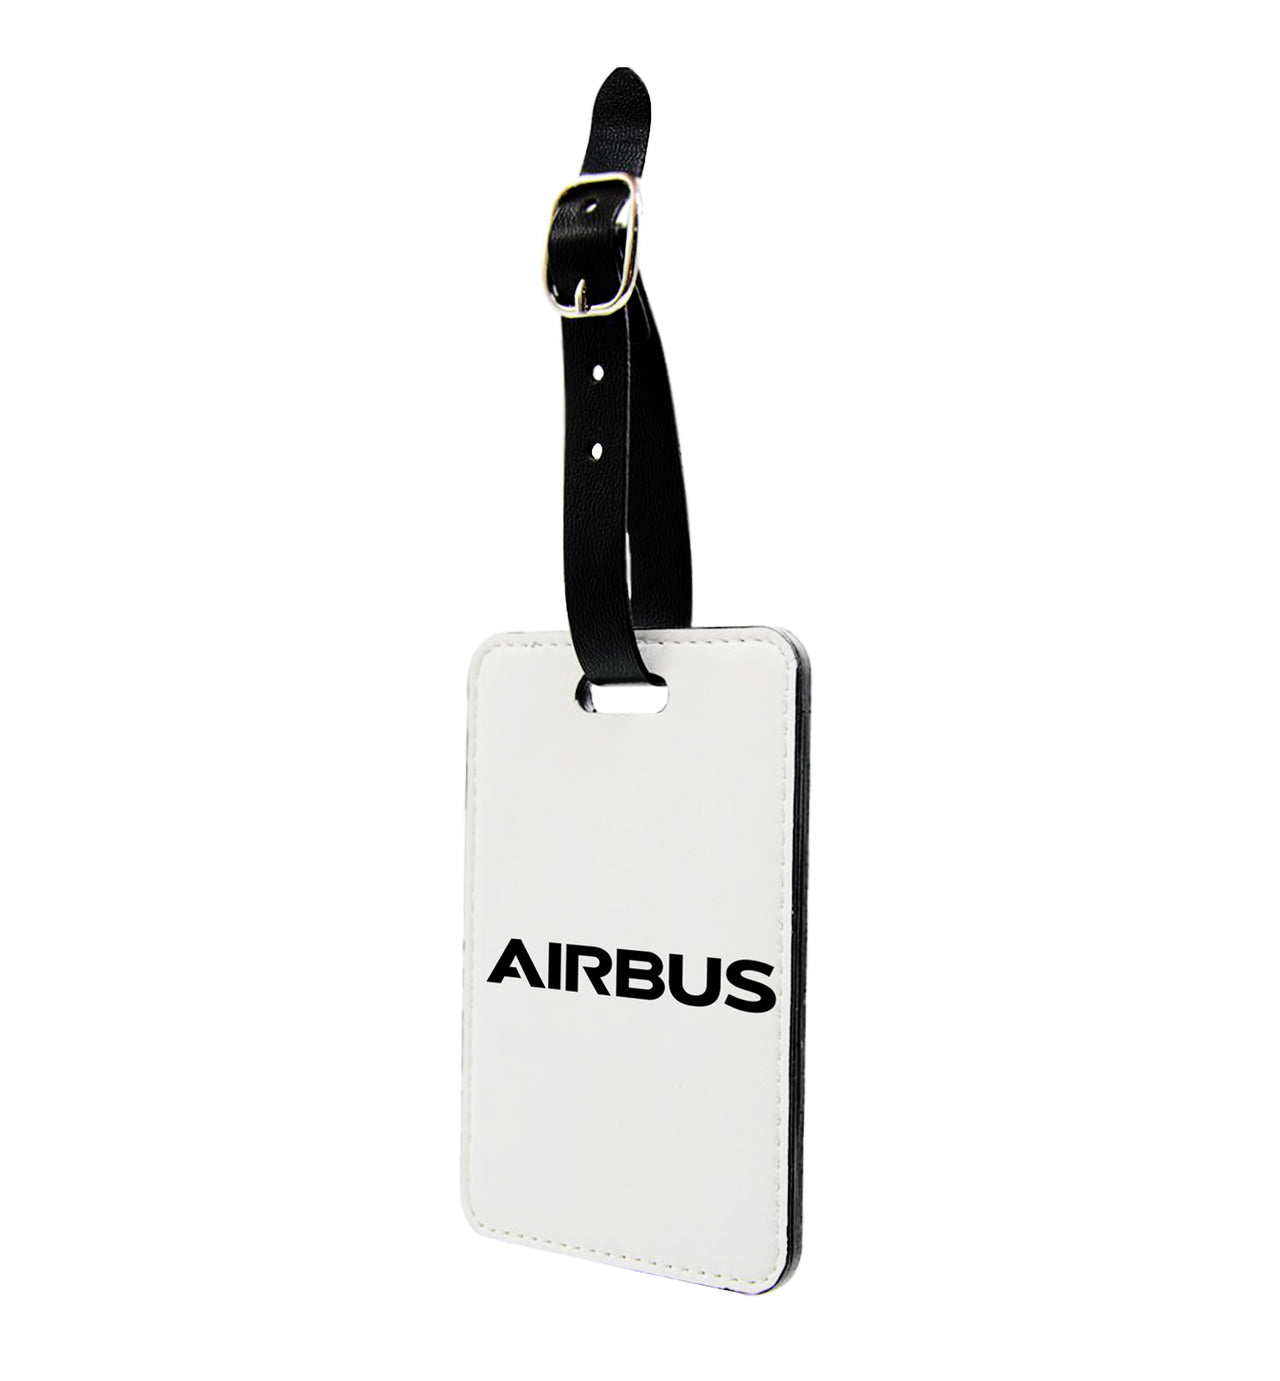 Airbus & Text Designed Luggage Tag